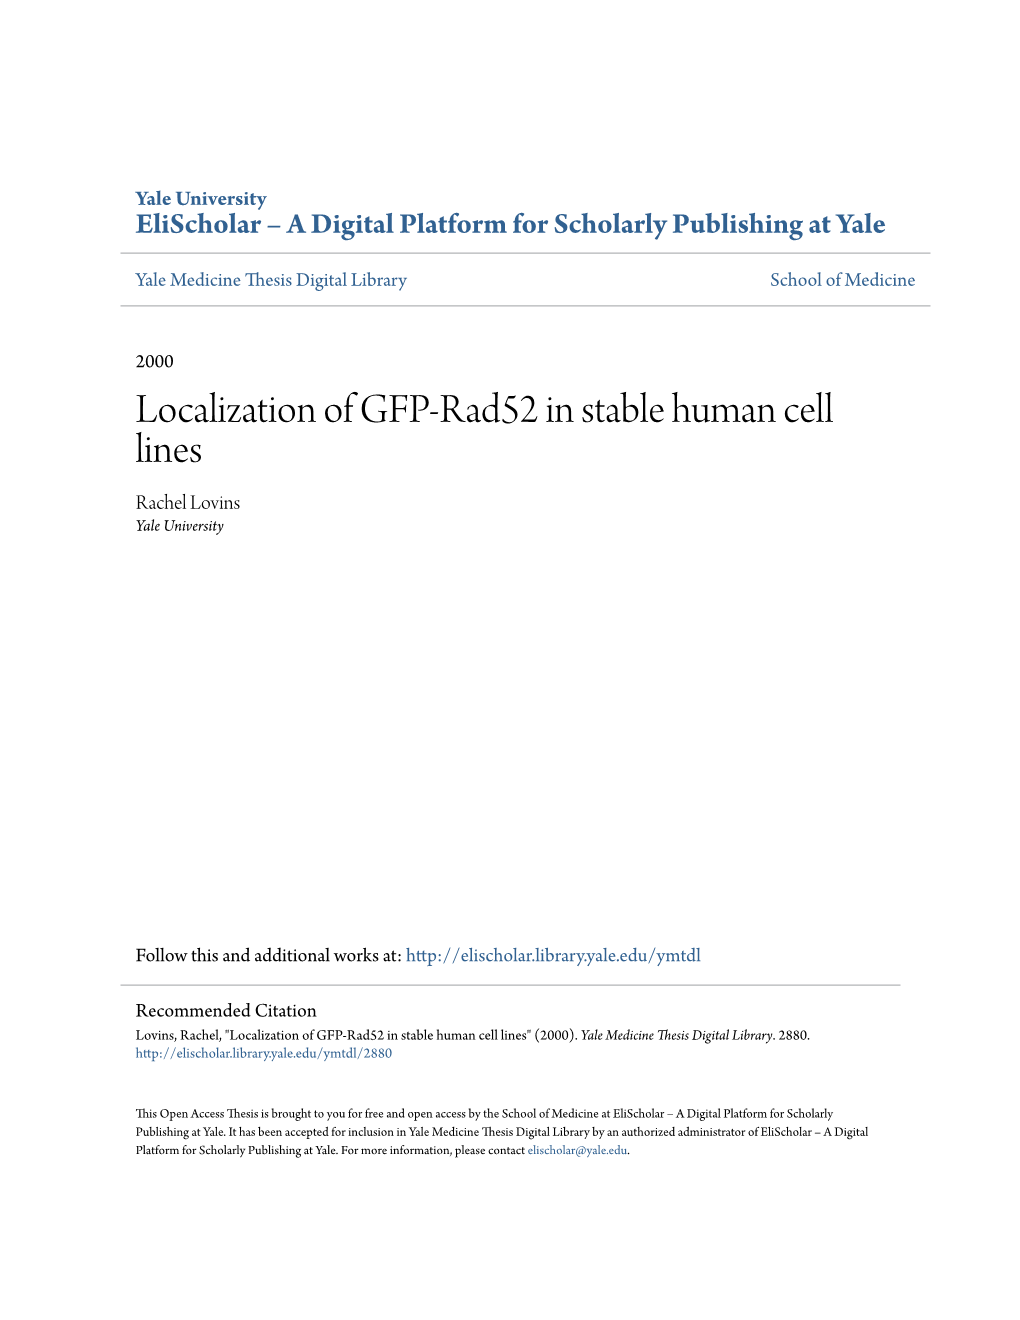 Localization of GFP-Rad52 in Stable Human Cell Lines Rachel Lovins Yale University